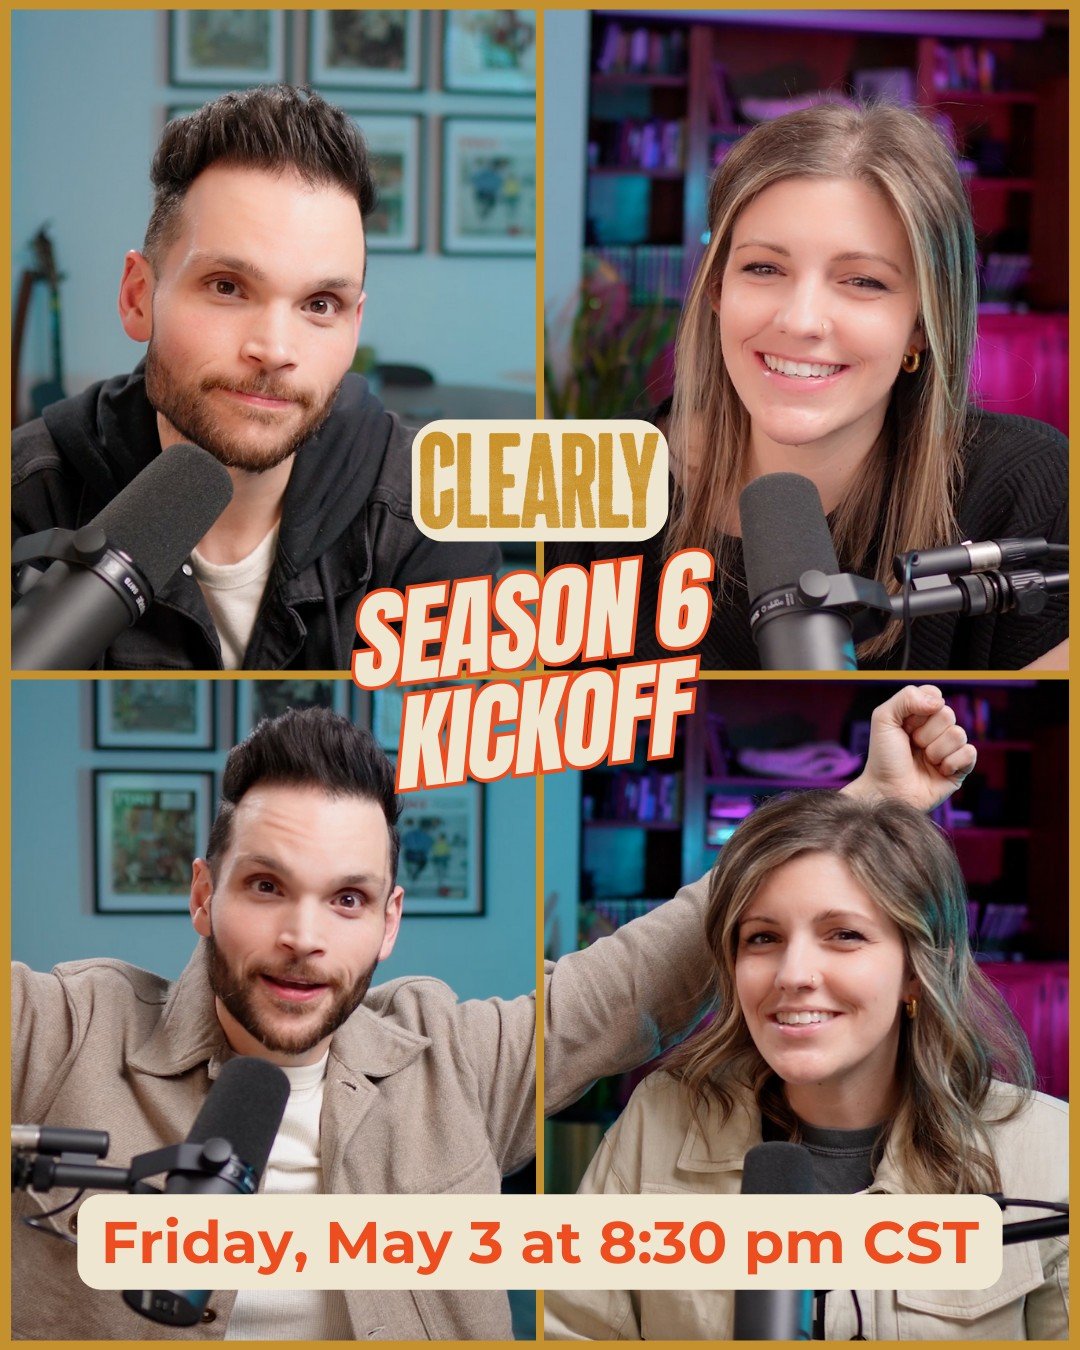 JOIN US! 🎙
You&rsquo;re invited to join our LIVE RECORDING of our Season 6 kickoff episode! 🎉

We normally reserve for our Patreon supporters and donors only. But this week we wanted to invite YOU!

👉 Sign up through the link in our bio!

#clearly